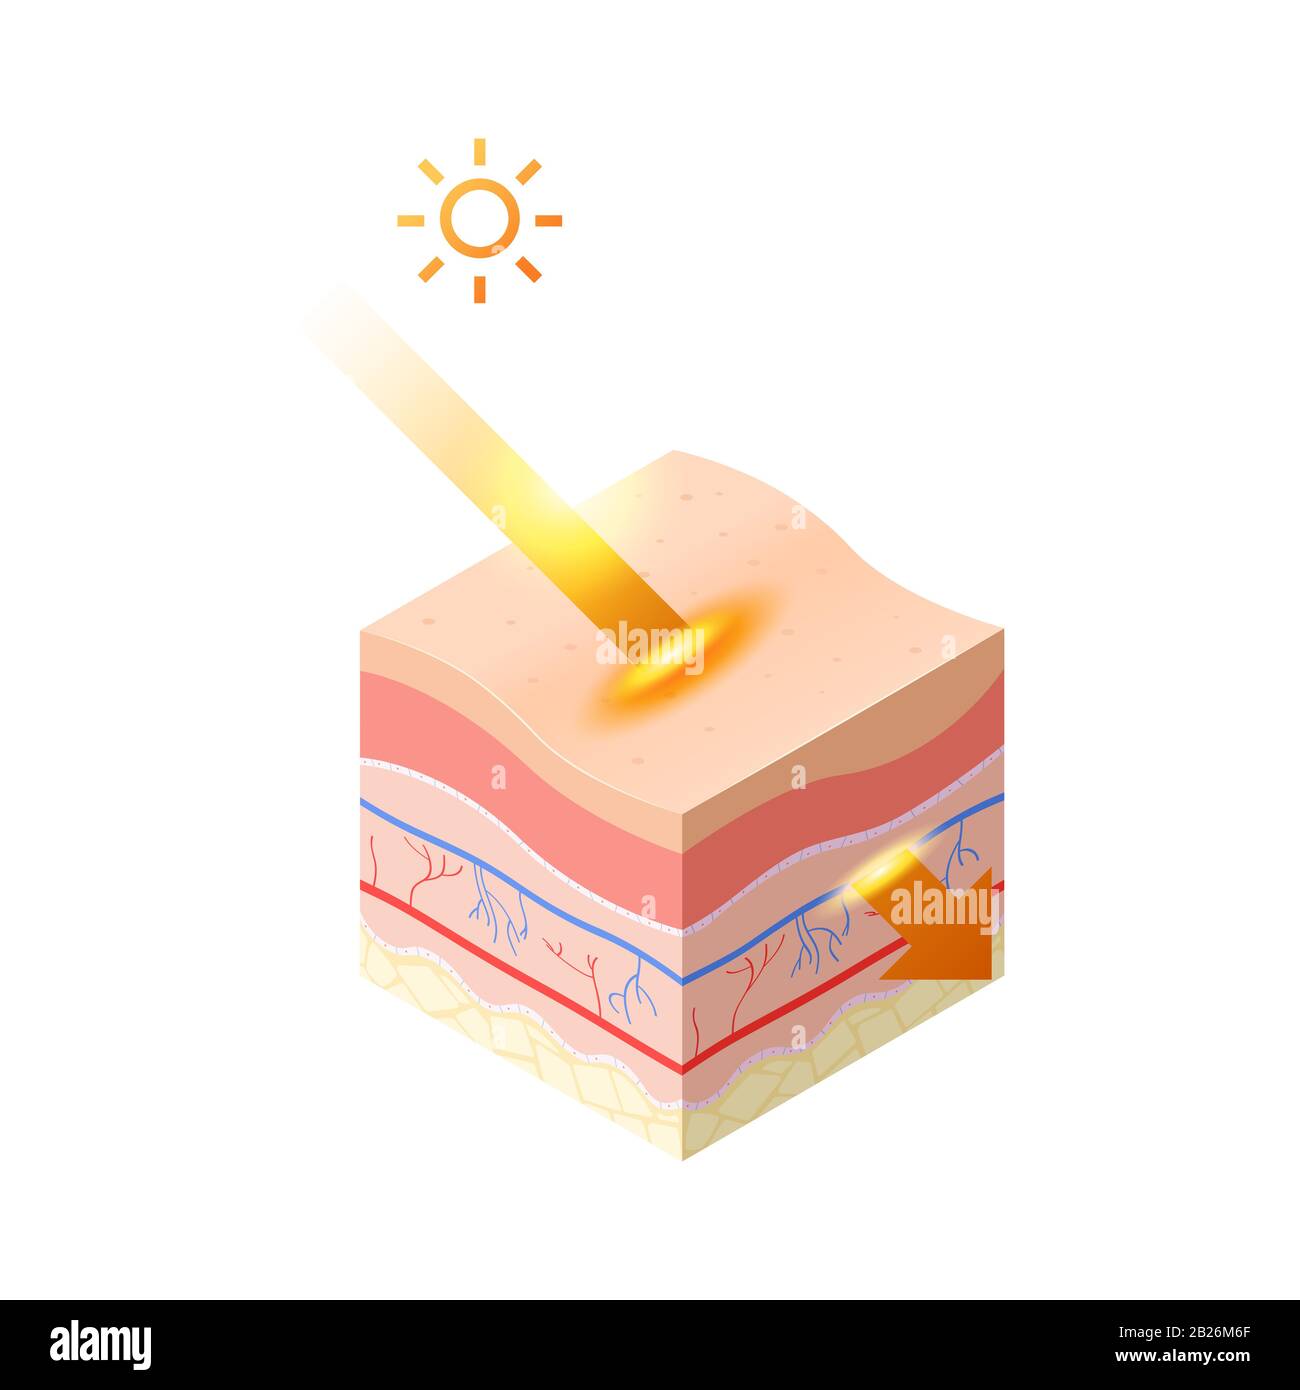 uv ray from sun penetrate into epidermis of skin cross-section of human skin layers structure skincare medical concept flat vector illustration Stock Vector